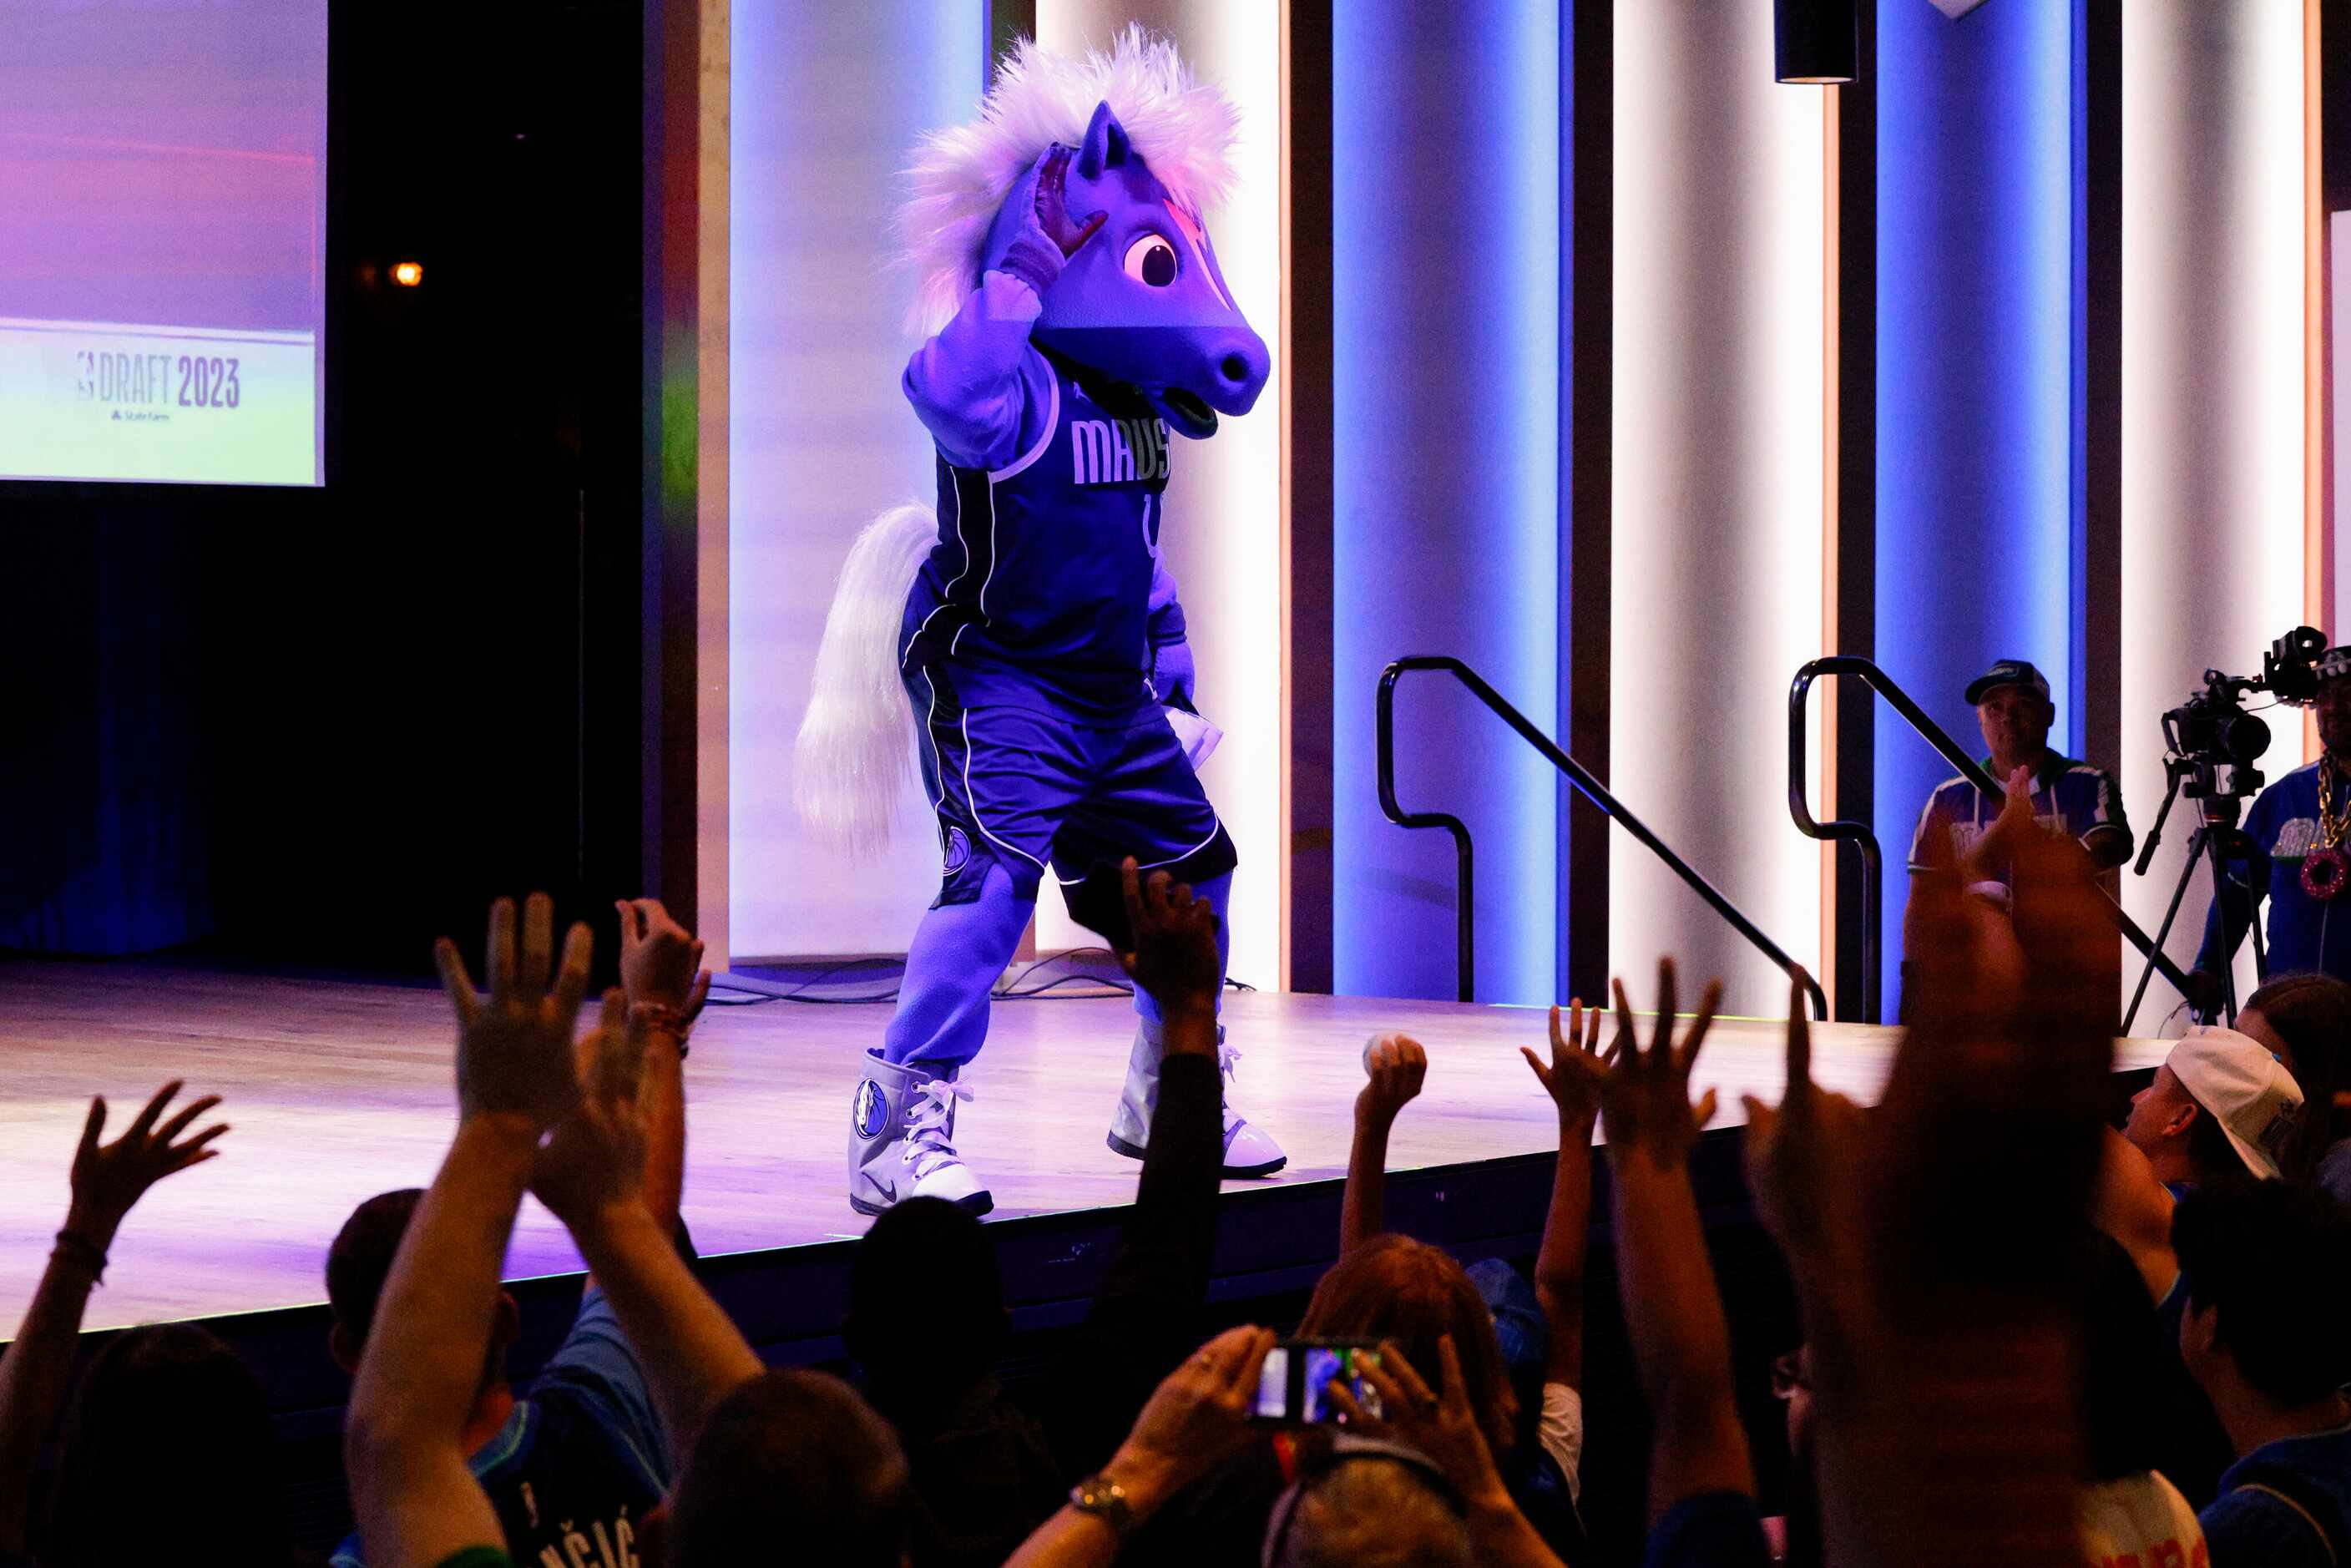 Dallas Mavericks mascot Champ pumps up the crowd before throwing a hat during a 2023 NBA...